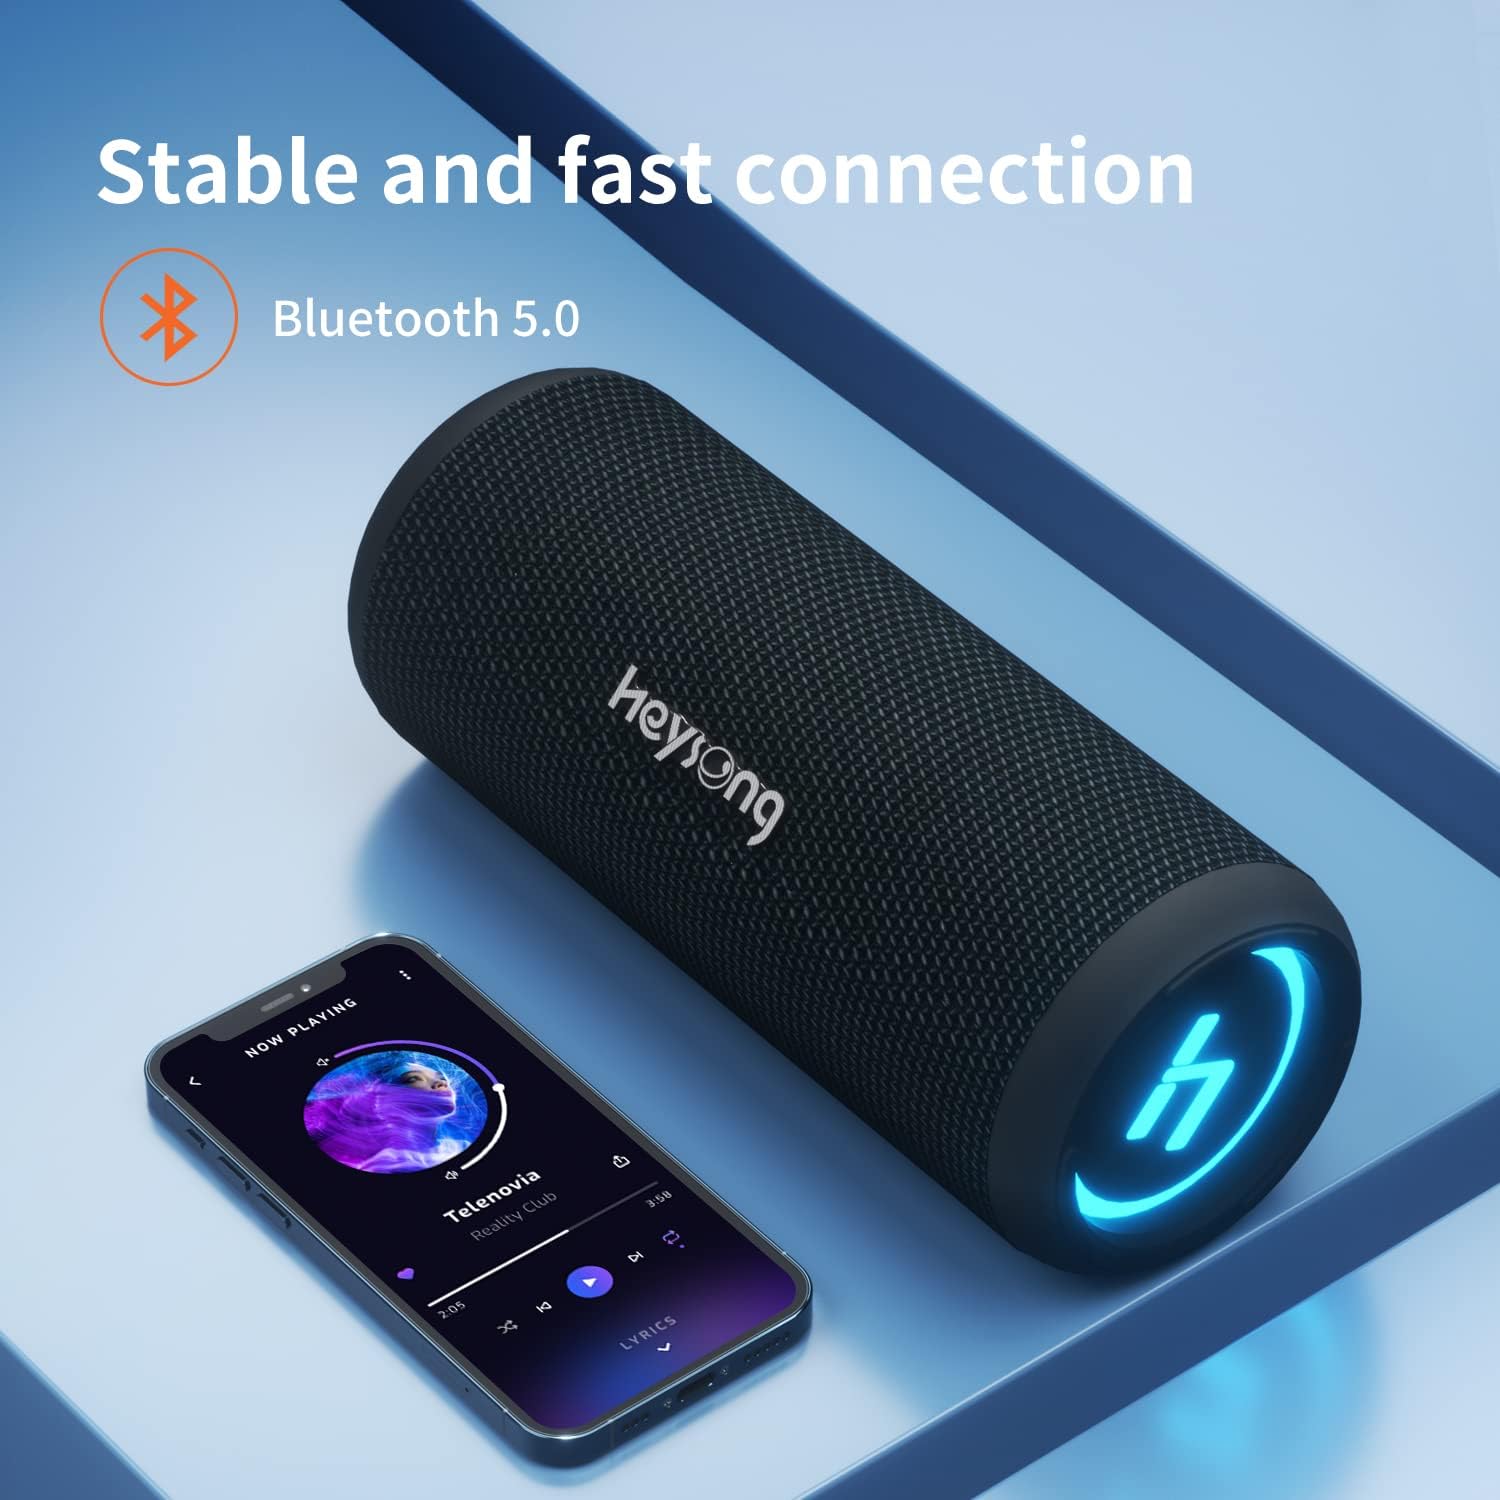 HEYSONG Bluetooth Speaker, Waterproof Portable Wireless Bluetooth Speakers with Led Light, 20W Loud Sound, TF Card, USB Playback, Pool Accessories for Kayak, Boat, Outdoor, Camping, Gifts for Men